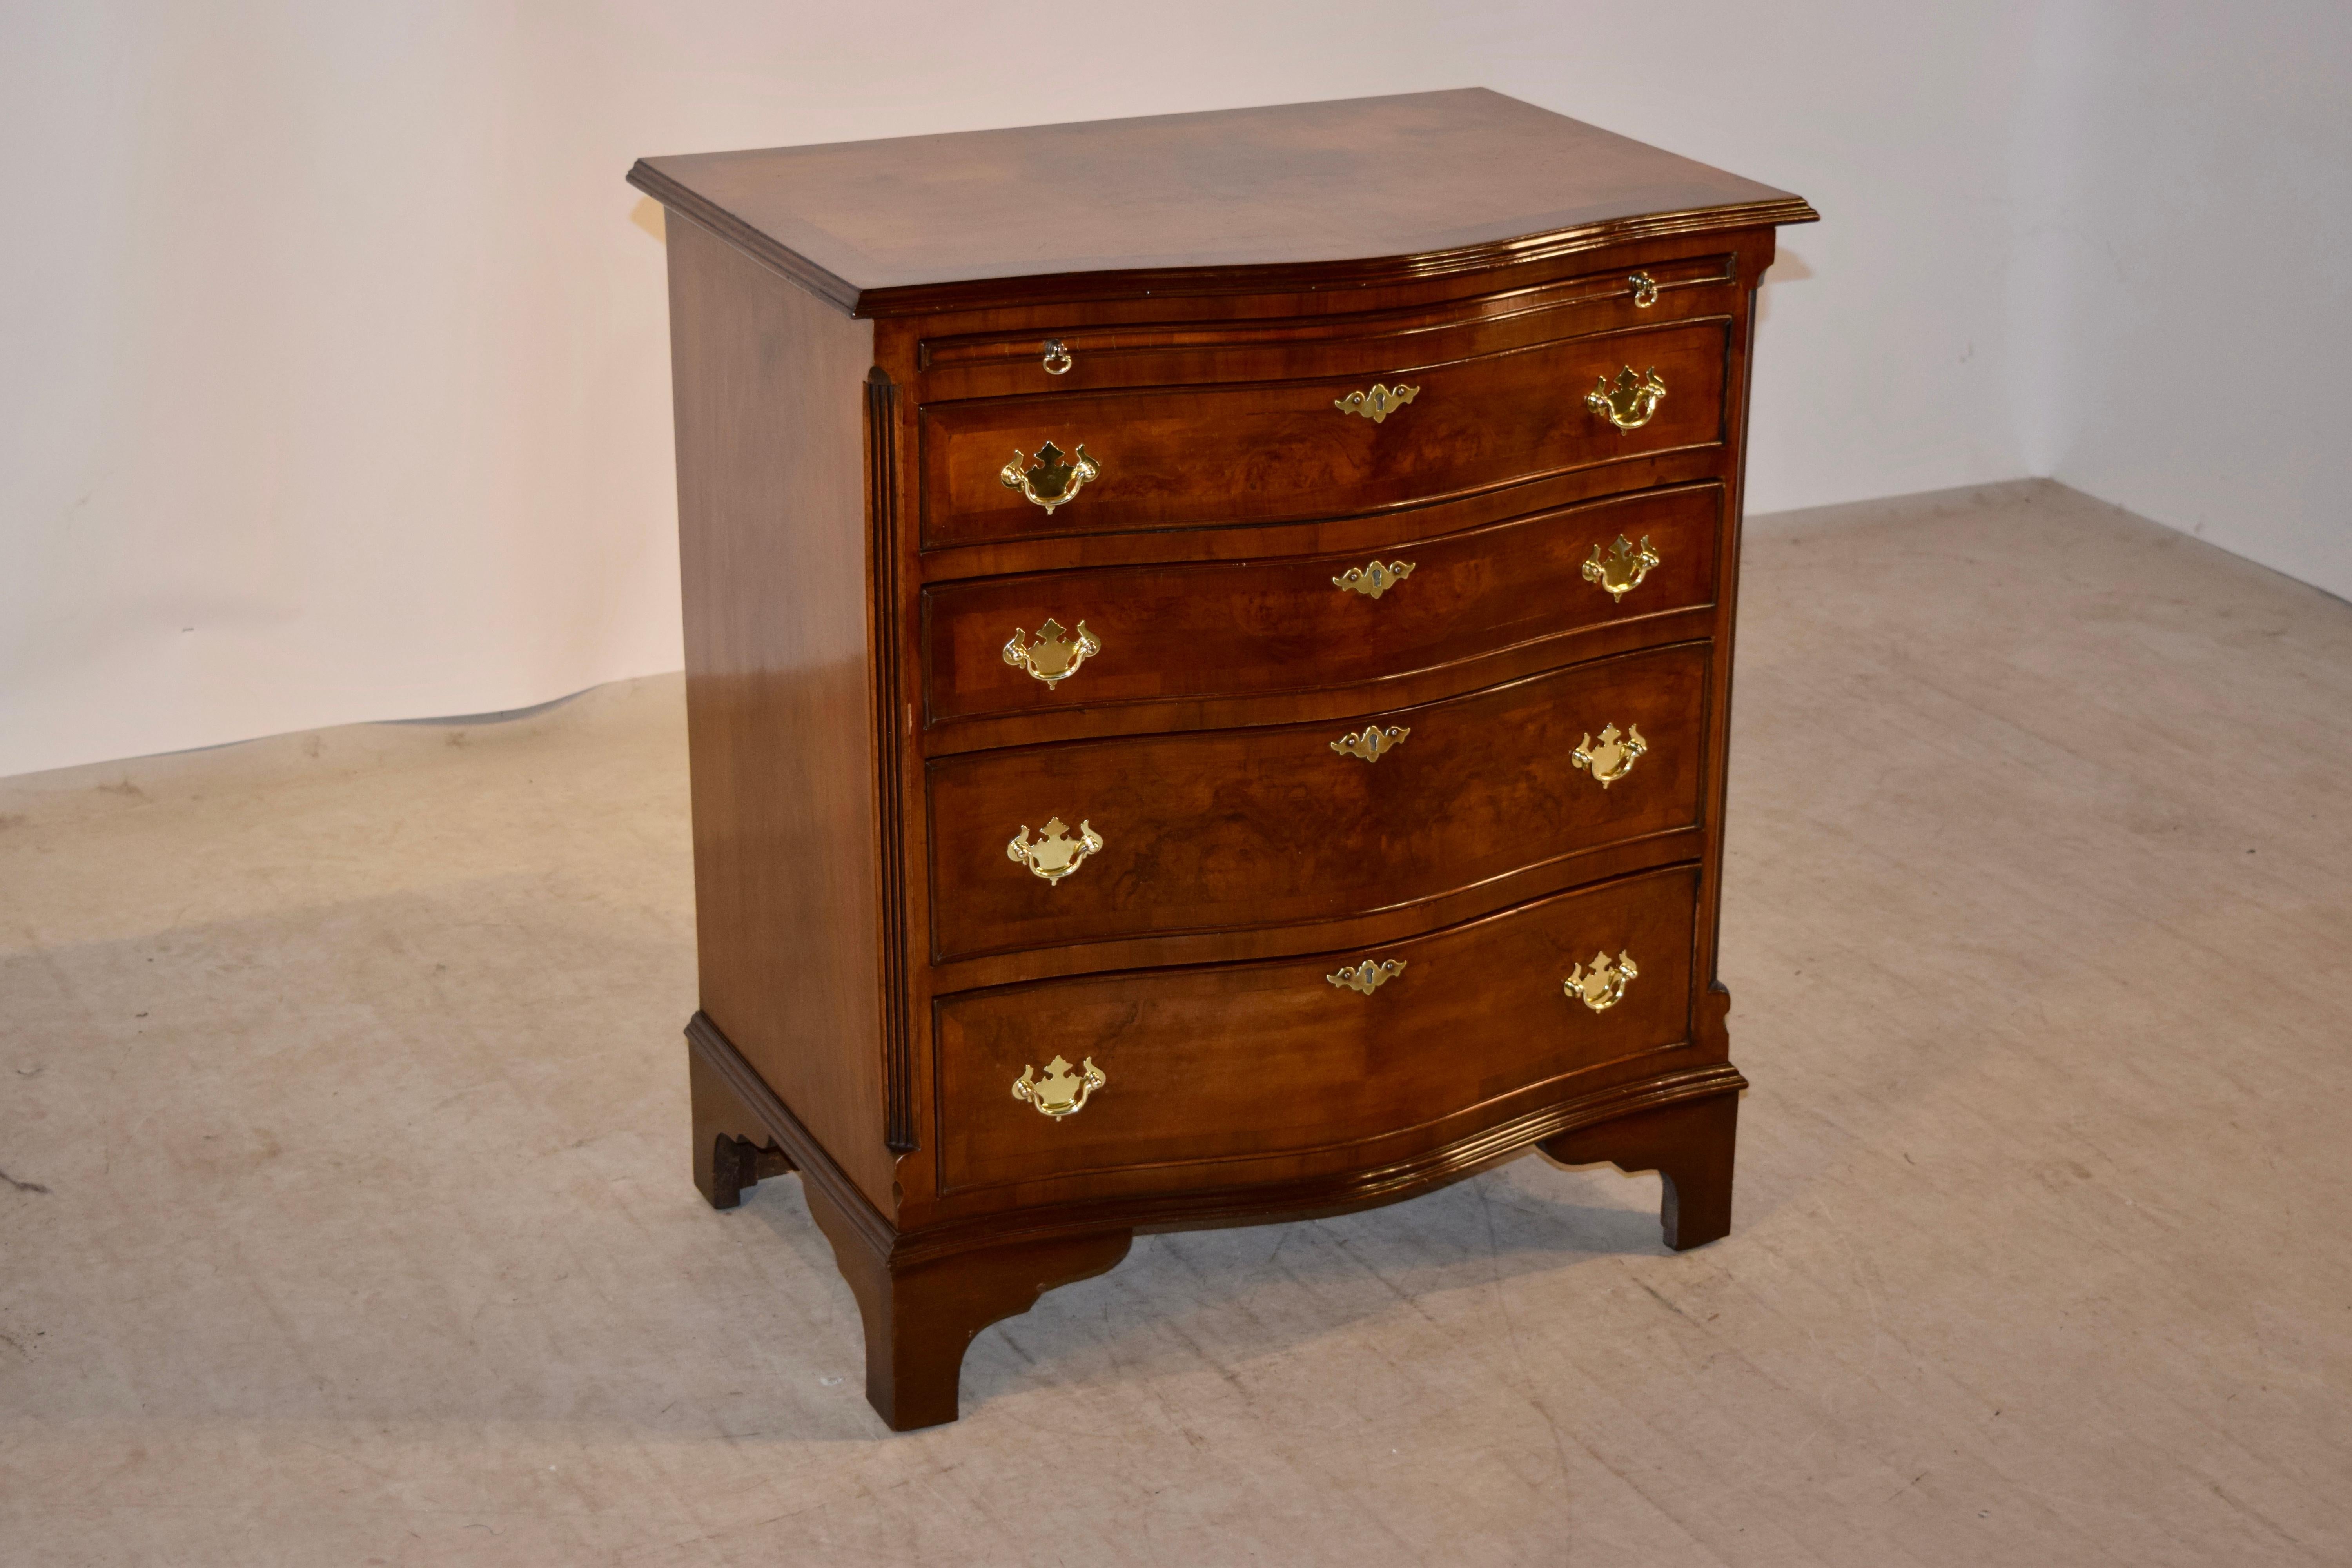 English serpentine side chest made from mahogany and walnut, circa 1920-1929. The top is banded in mahogany and has a central panel of burl walnut with a beveled edge, following down to a mahogany slide and four drawers, flanked by fluted quarter